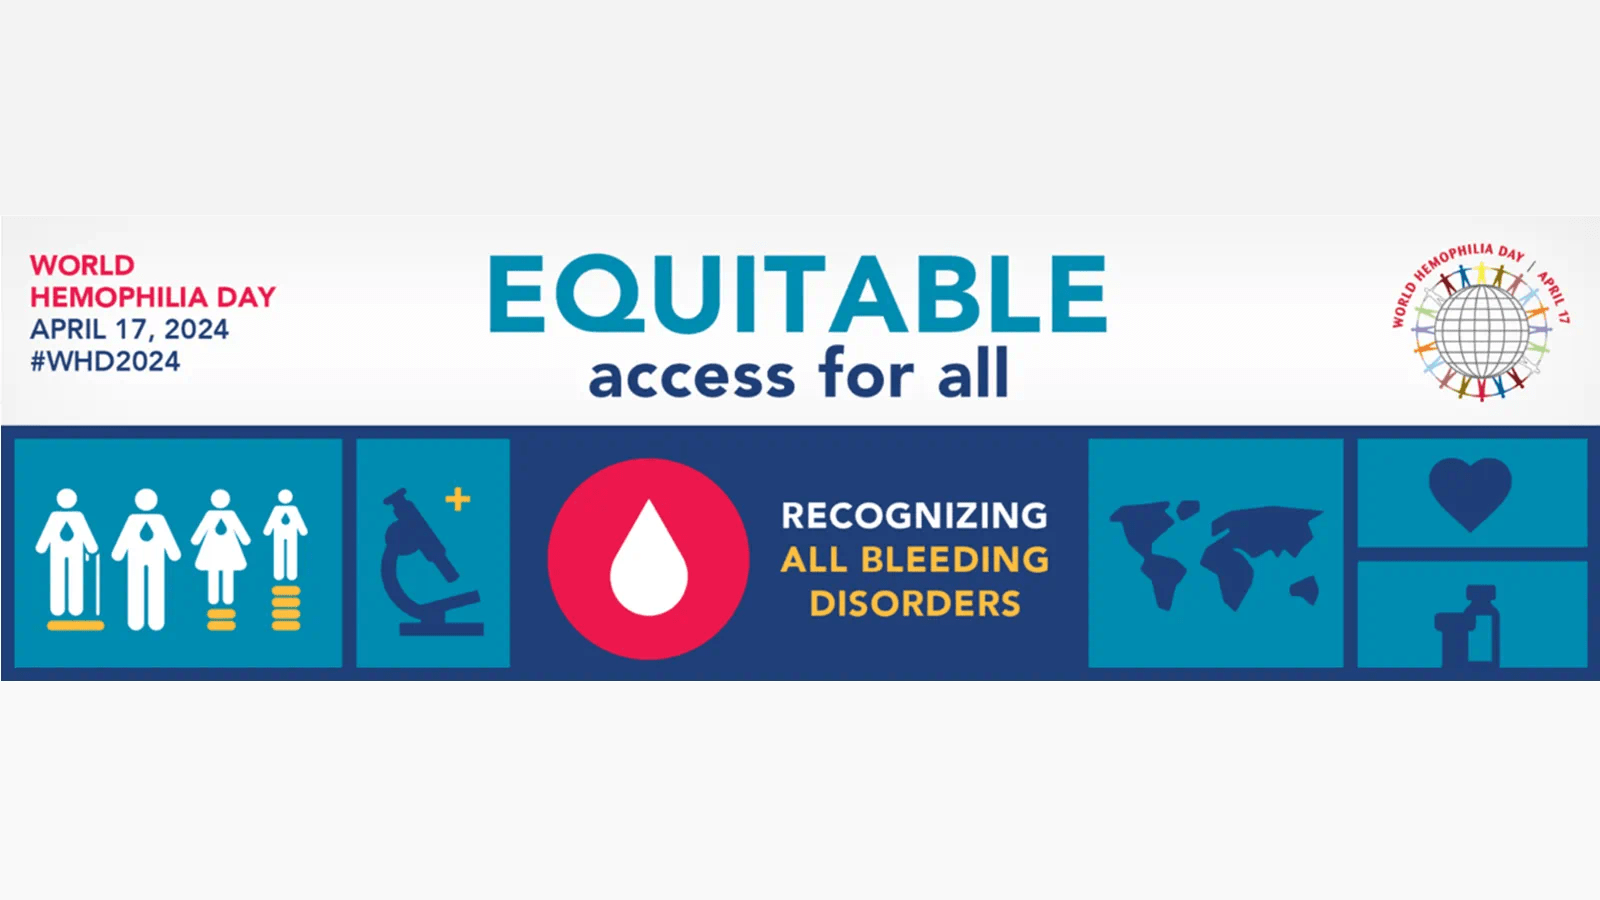 World Hemophilia Day 2024 Equitable Access for All